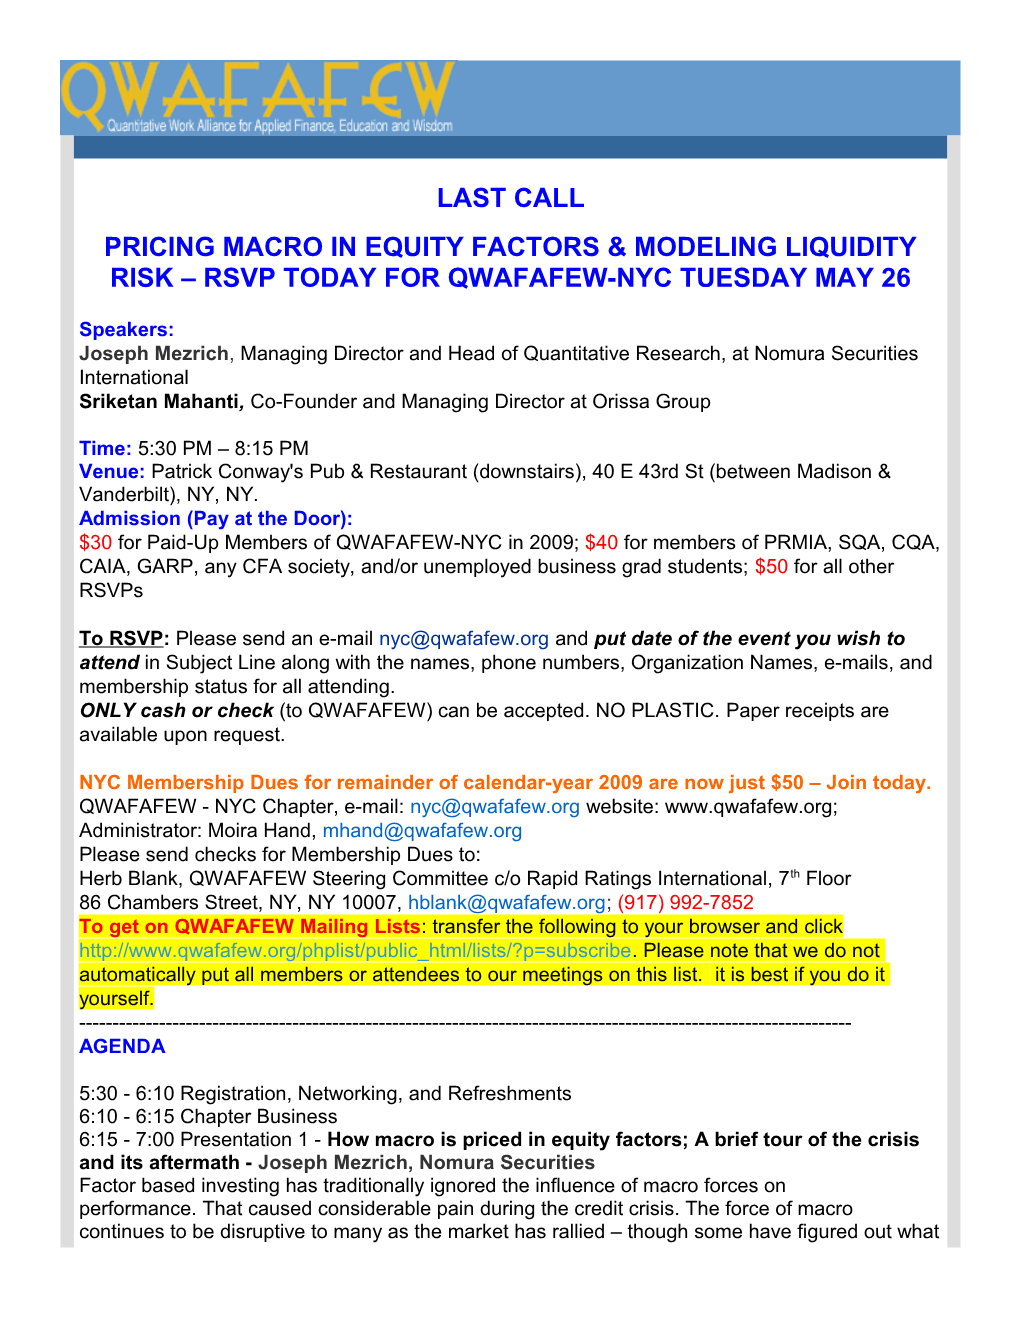 Last Call Pricing Macro in Equity Factors & Modeling Liquidity Risk Rsvp Today for Qwafafew-Nyc